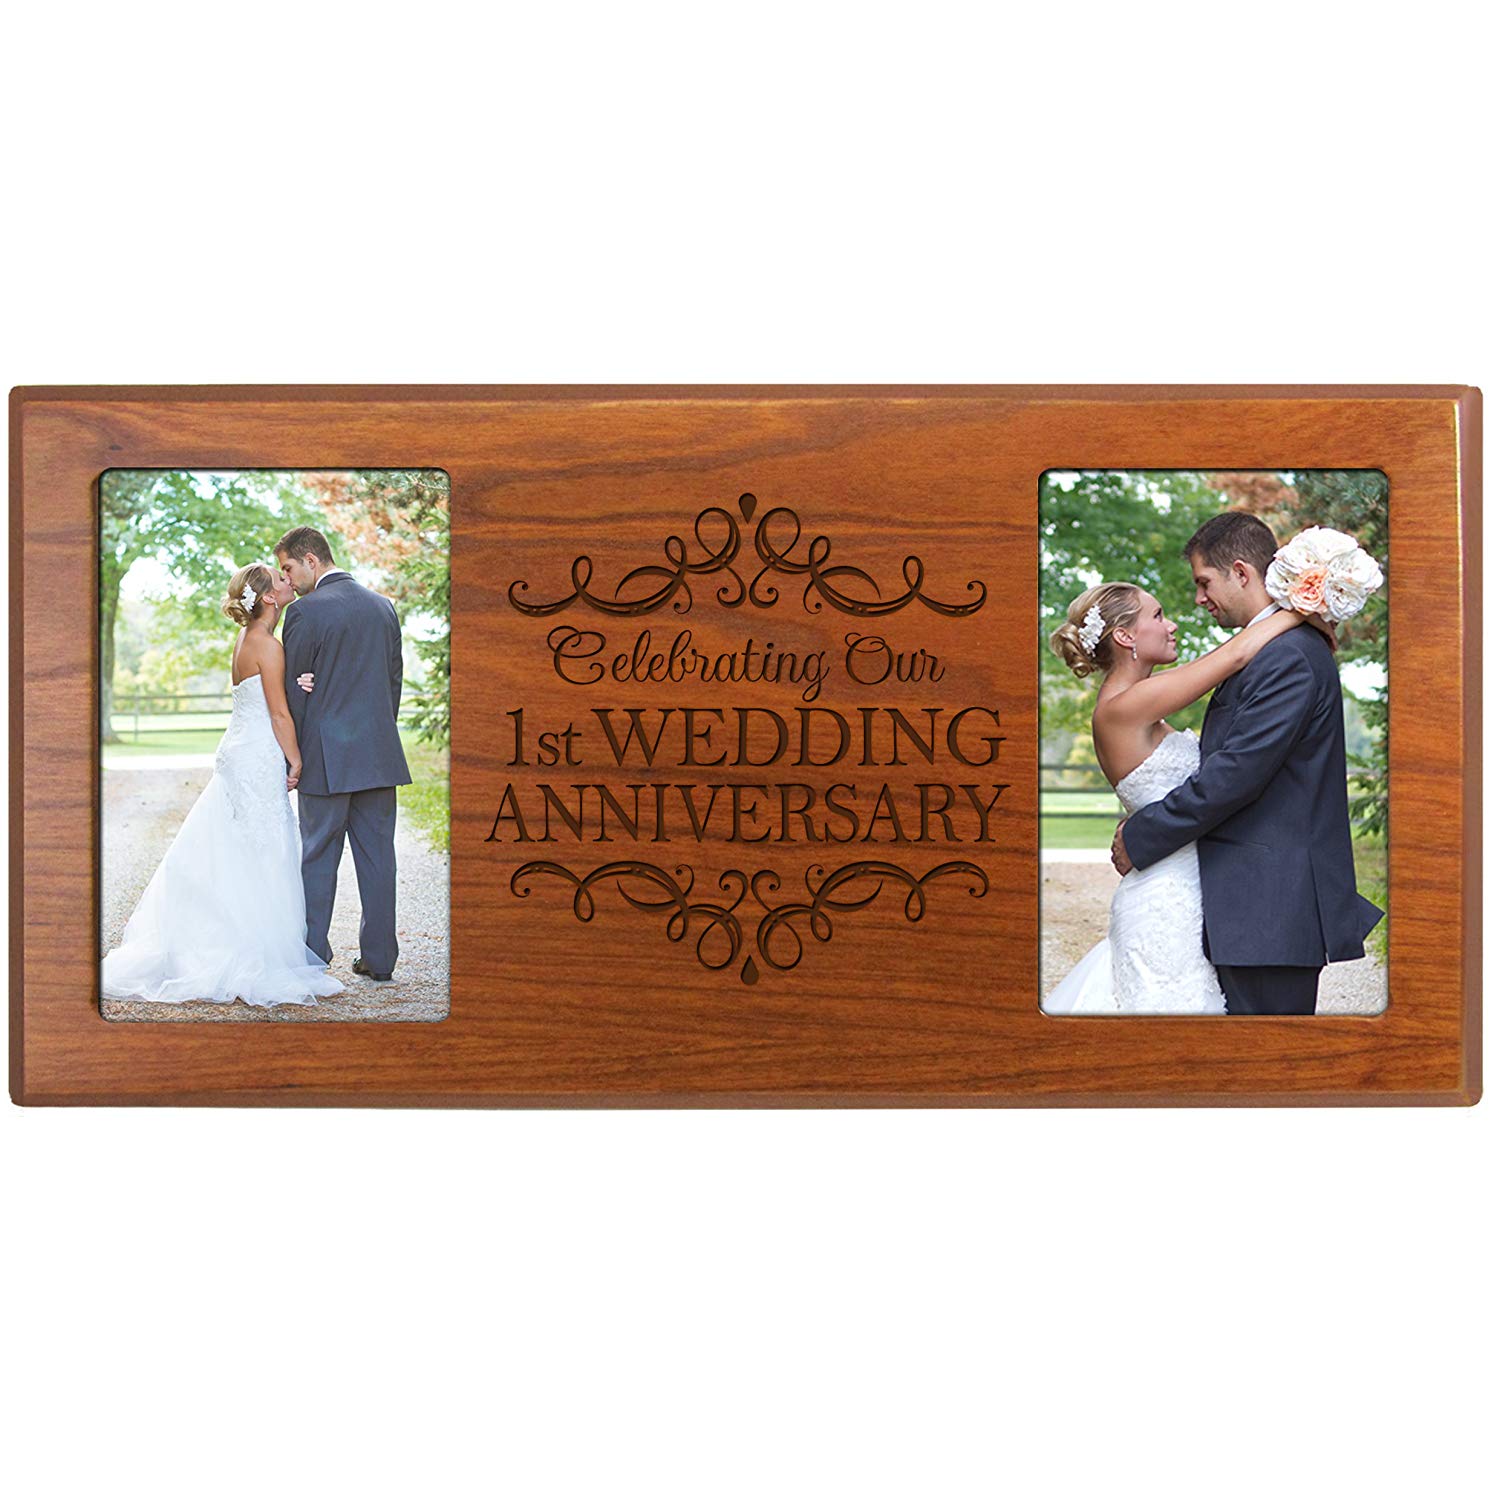 Lifesong Milestones Couples Unique Picture Frame for 1st Wedding Anniversary Present